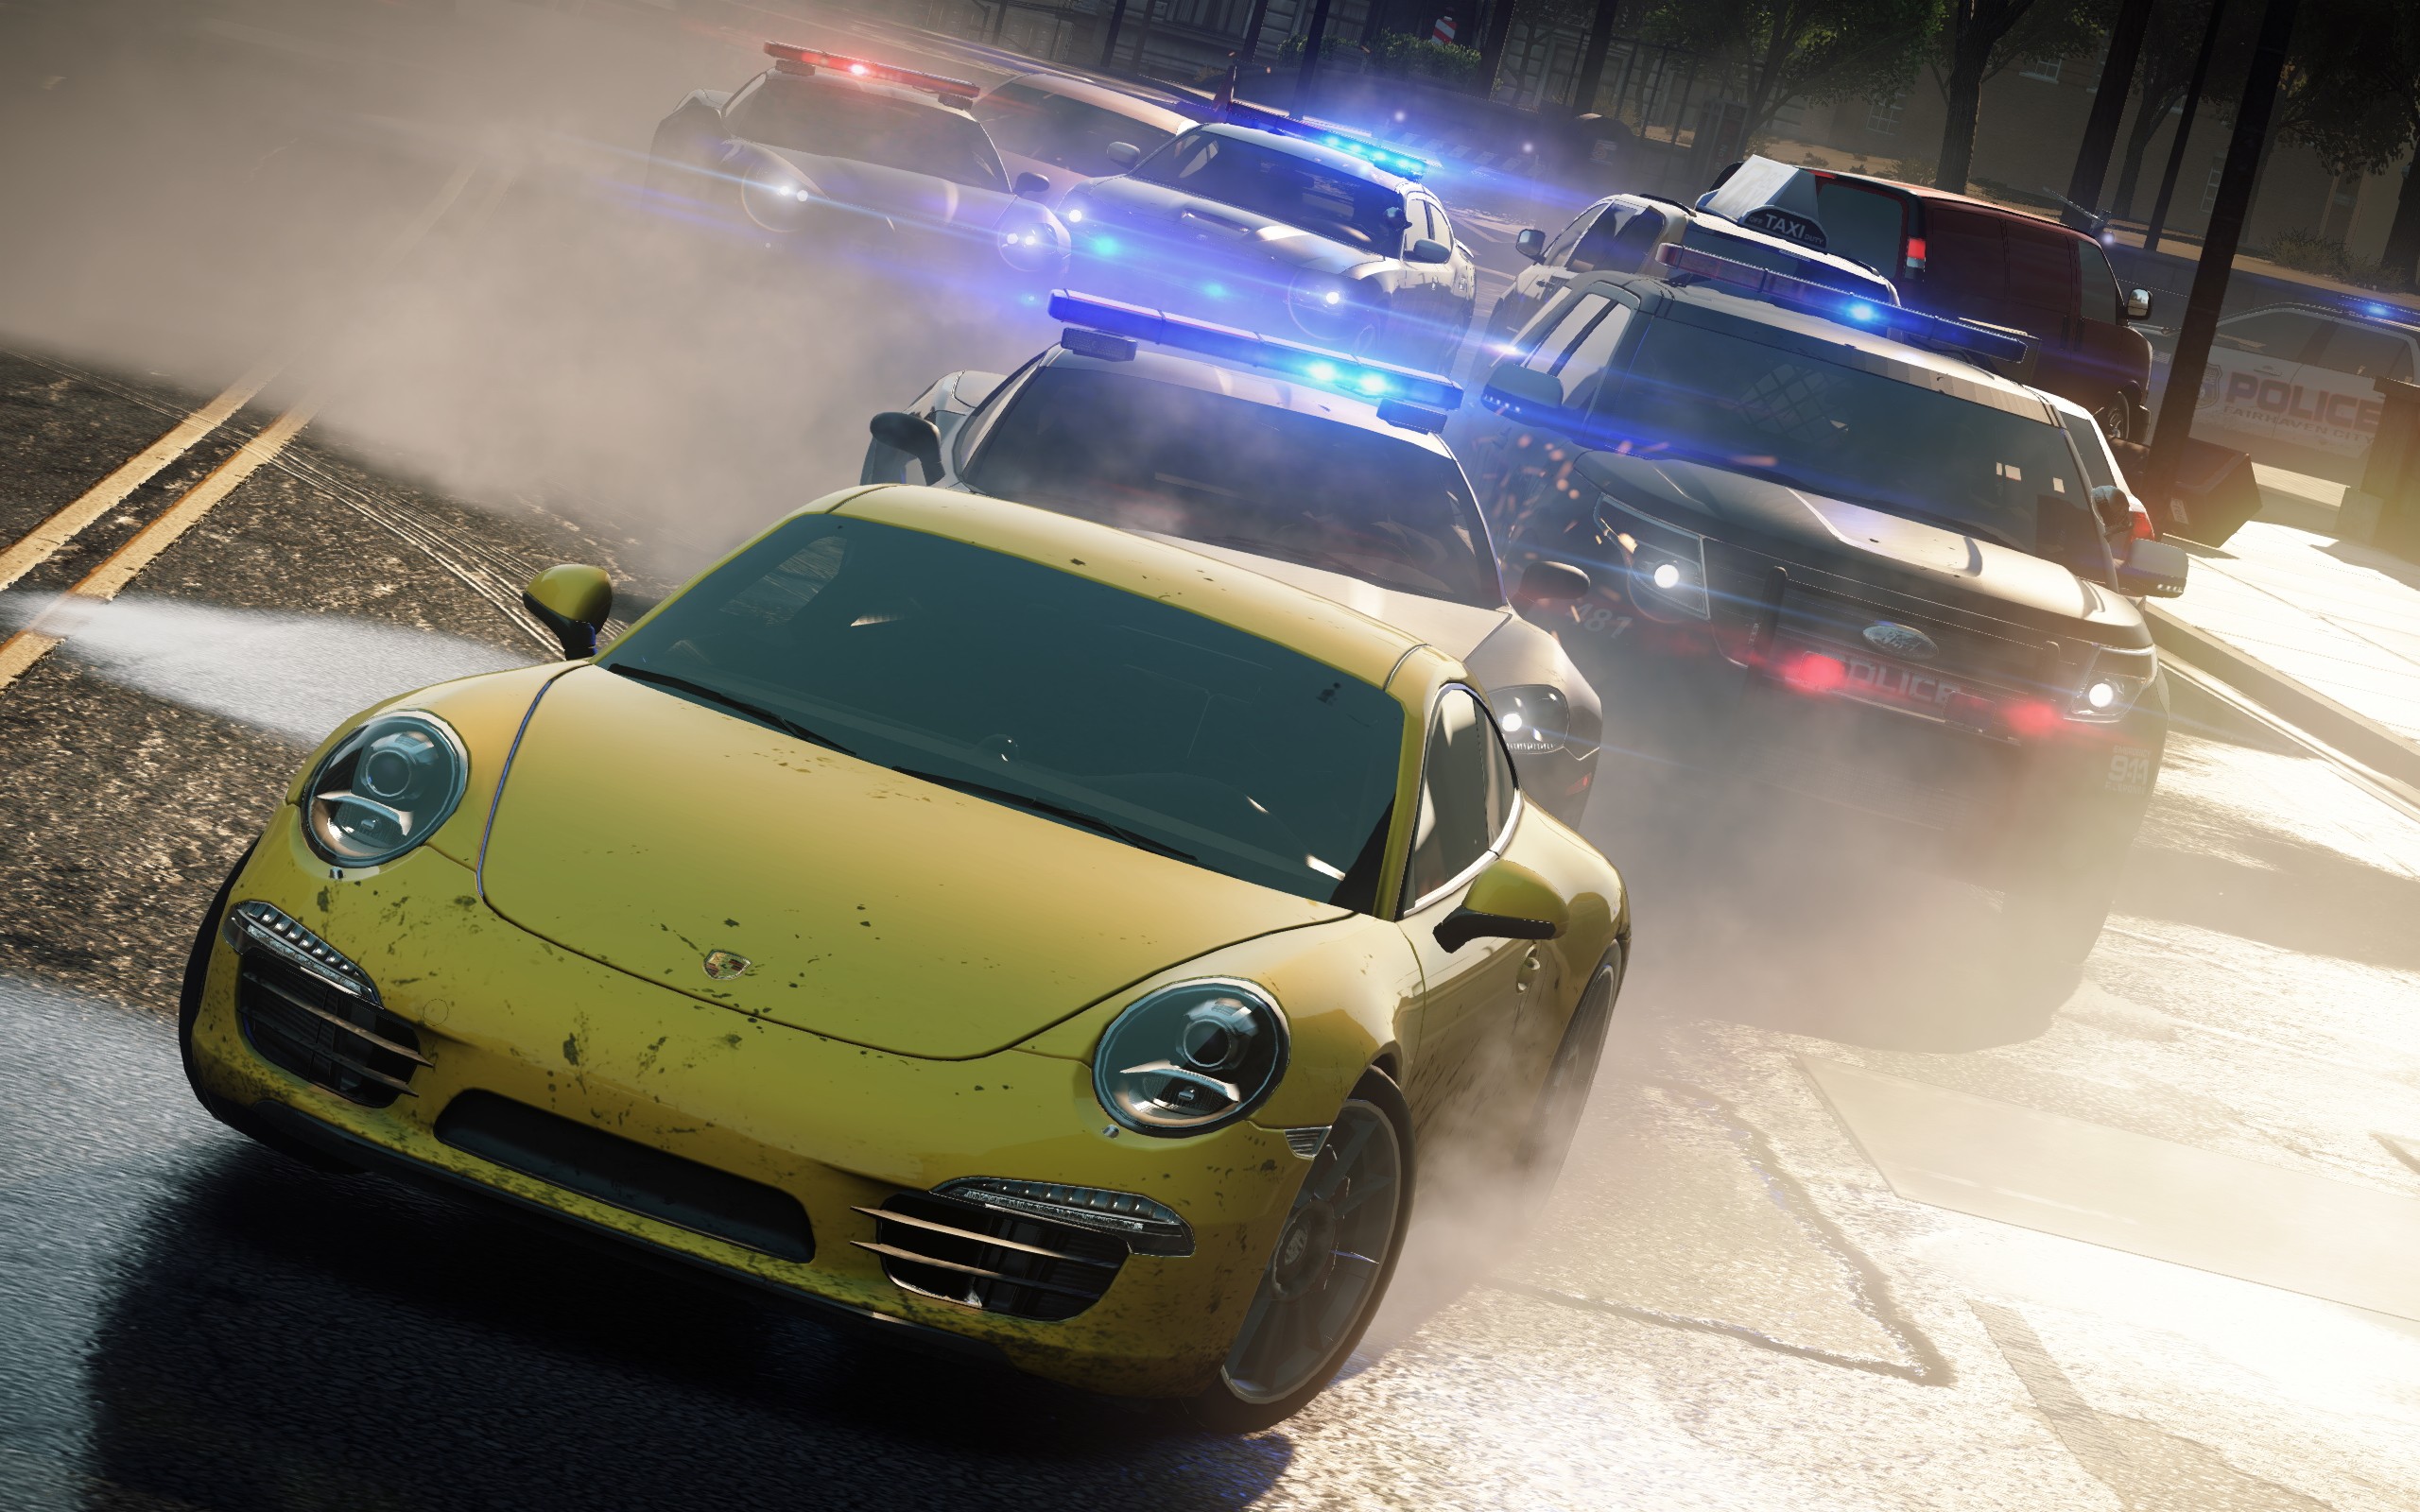 Nfs игра гонки. Most wanted 2012 погоня. Porsche 911 need for Speed. Need for Speed most wanted 2012 погоня. Porsche 911 Carrera s need for Speed most wanted.